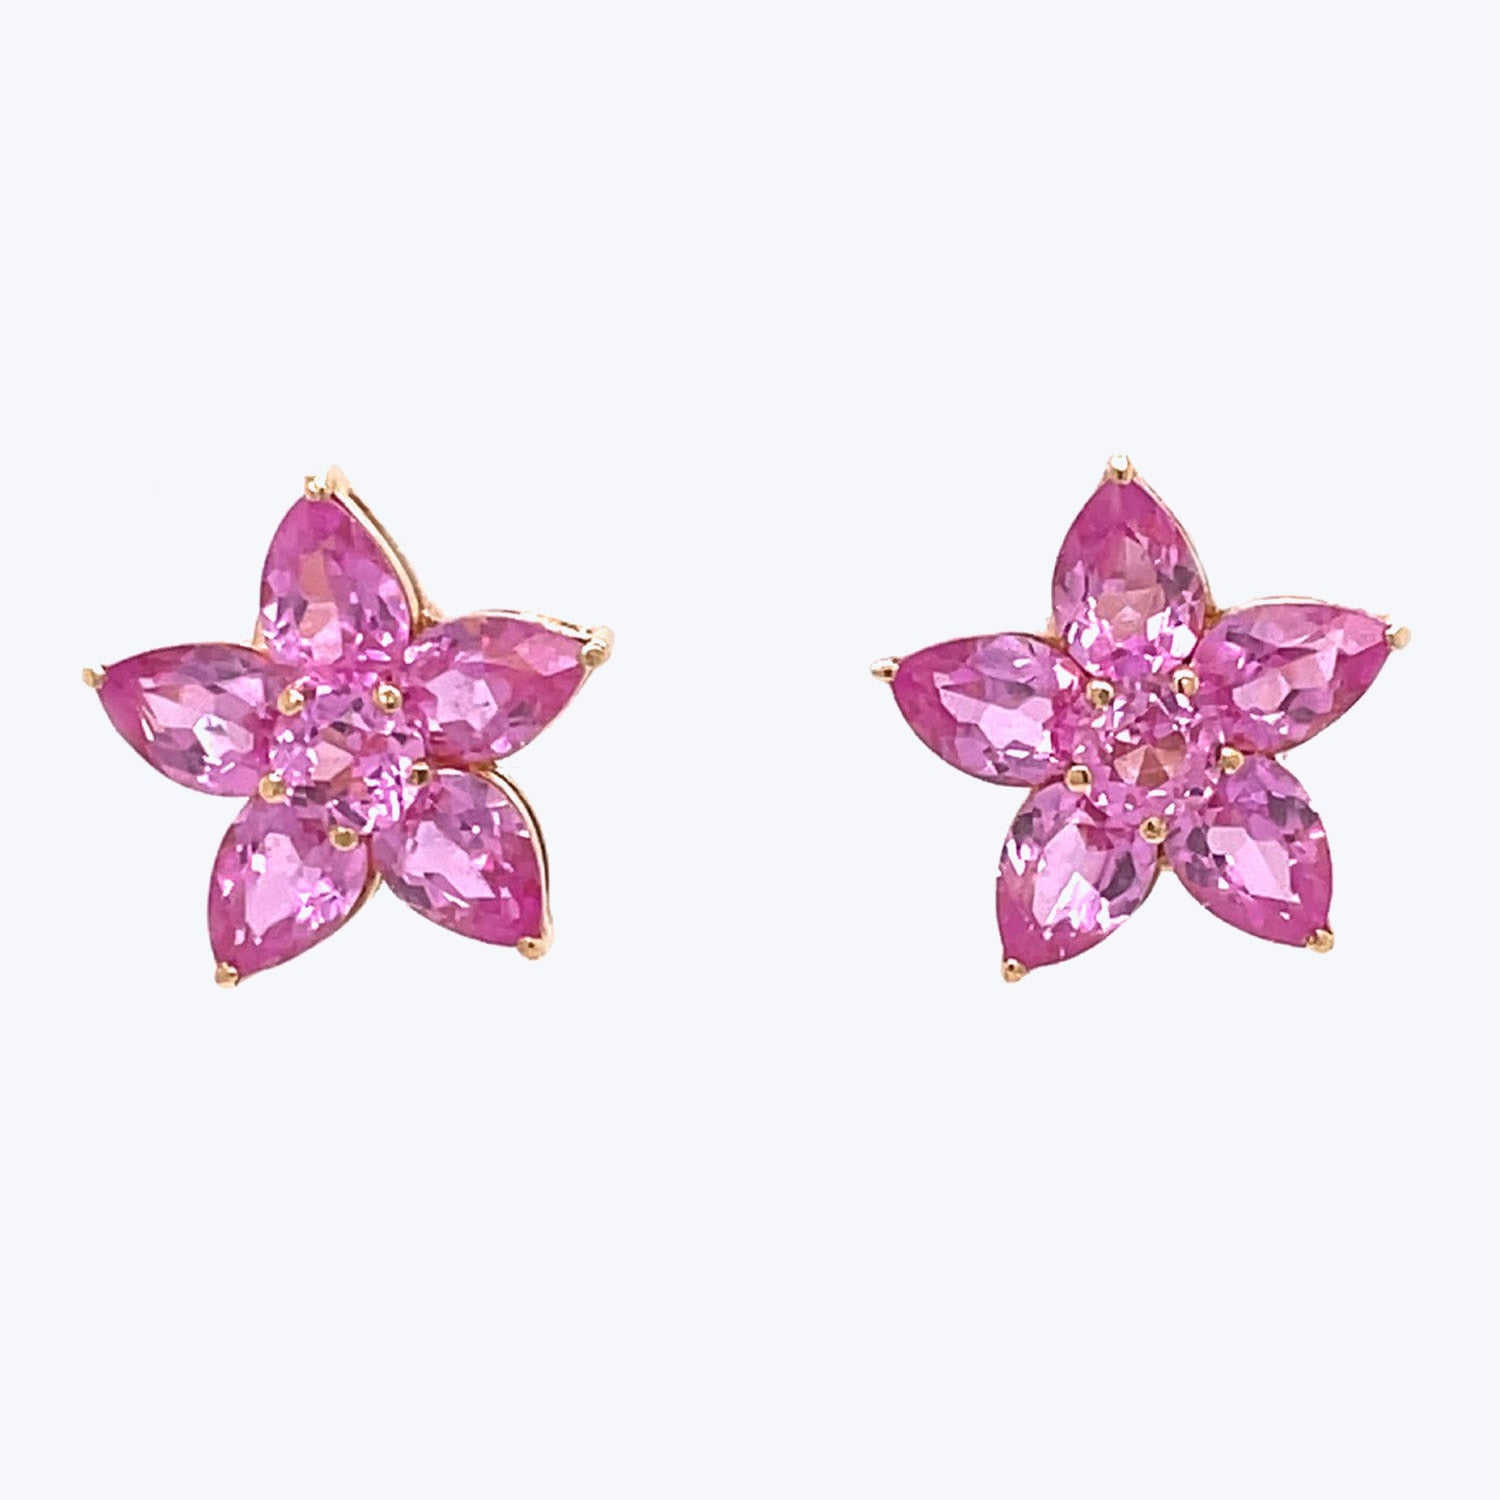 Elegant floral earrings crafted with faceted pink gemstones and gold.